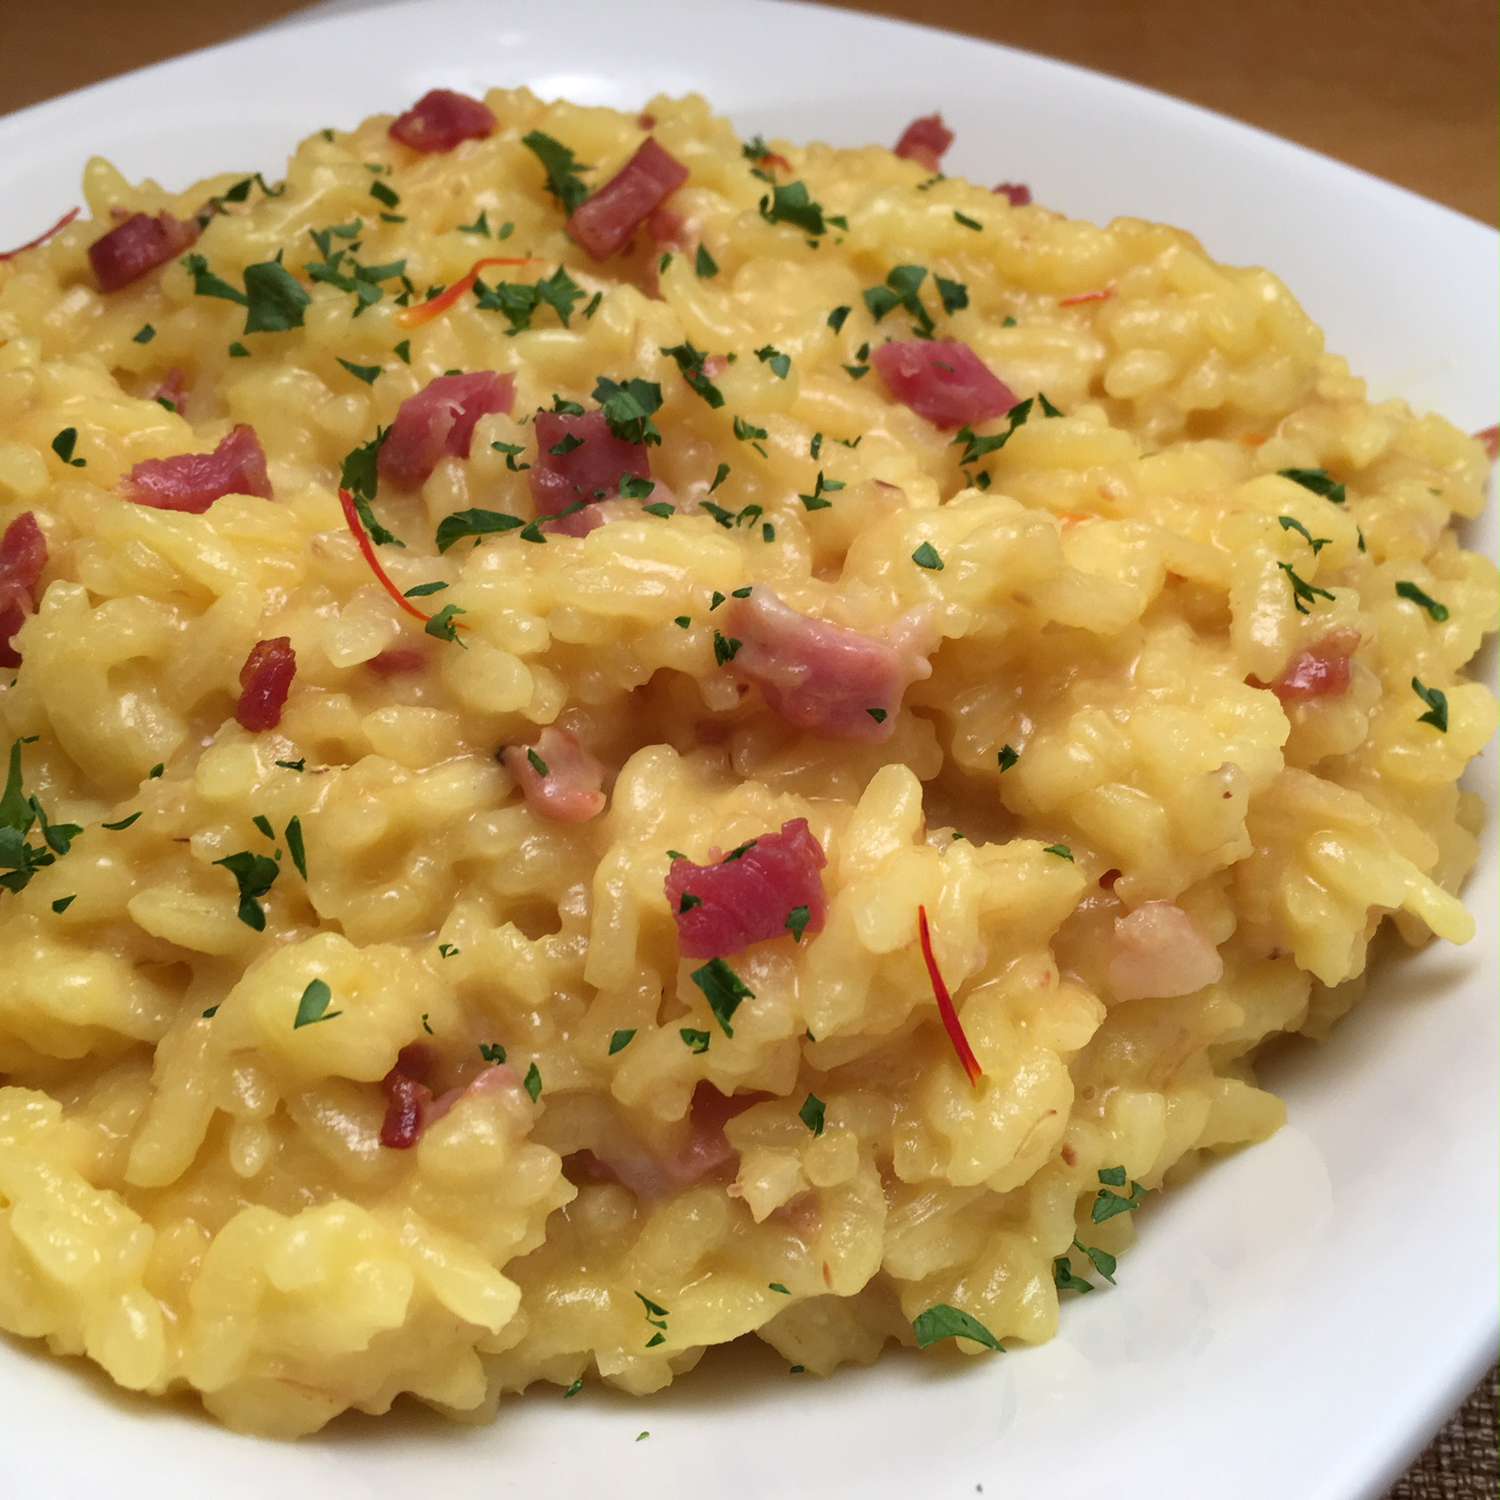 safrron risotto with pancetta and herbal garnish